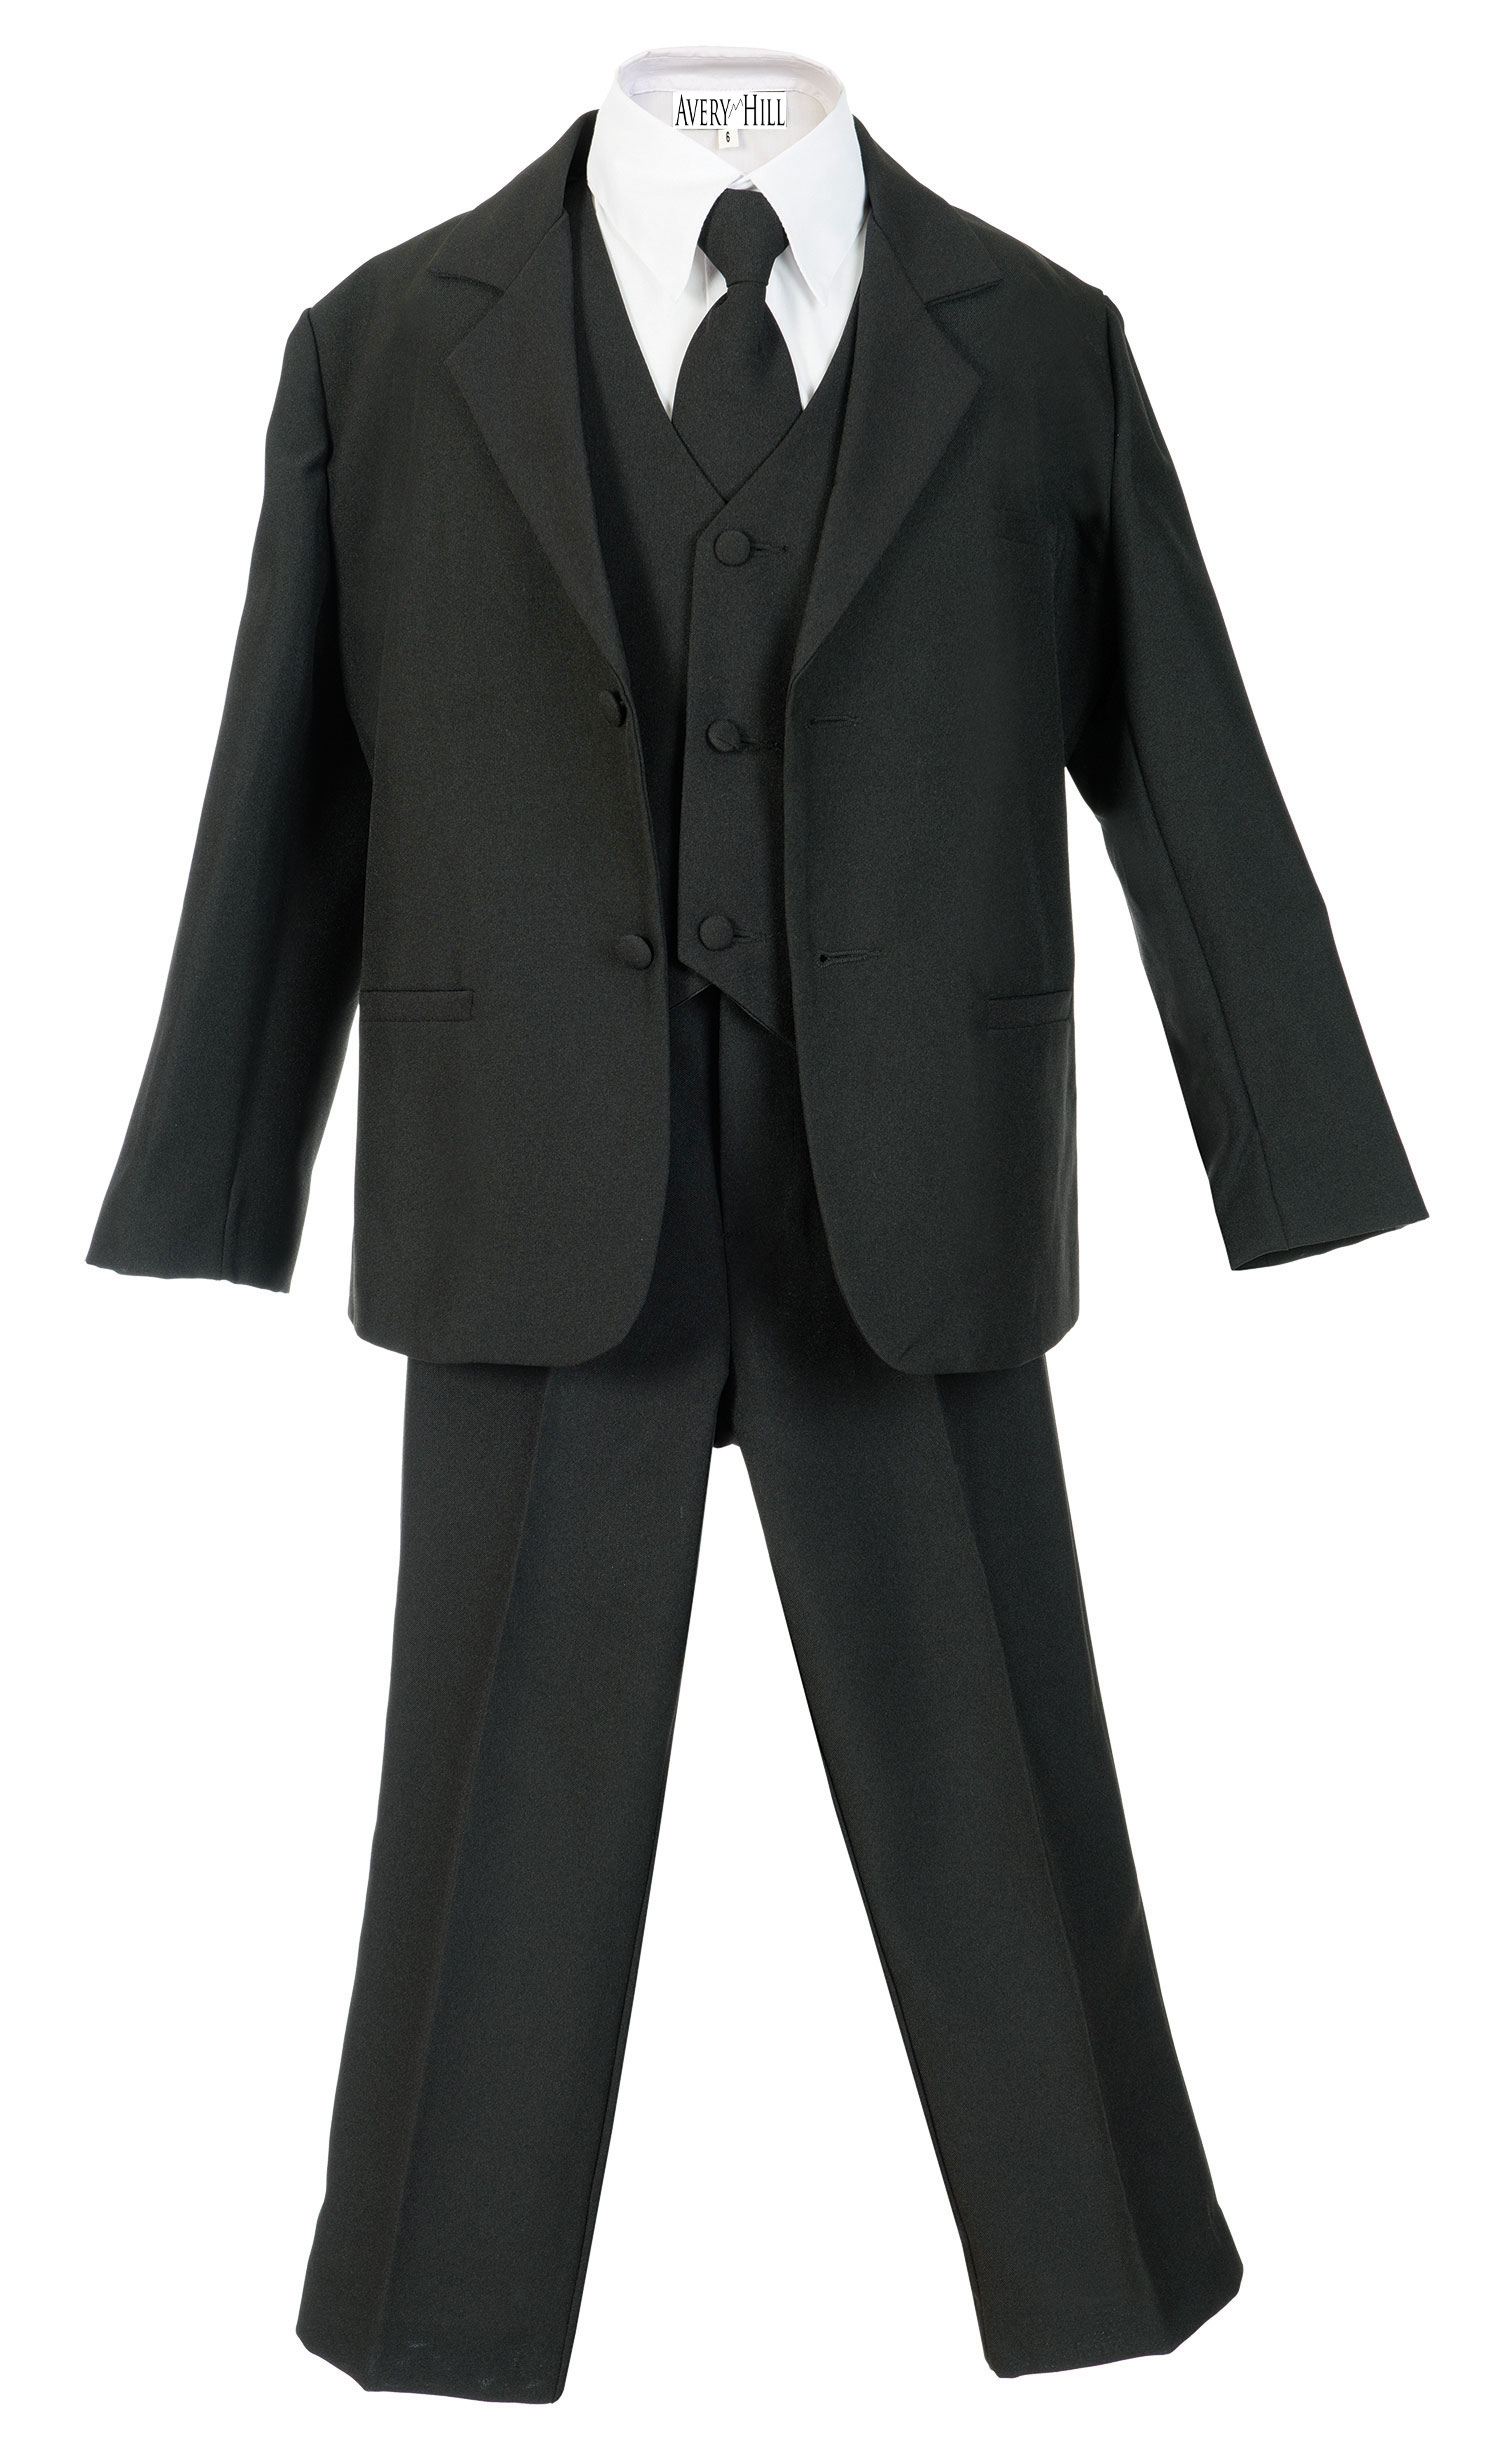 Avery Hill Boys Formal 5 Piece Suit with Shirt and Vest Black - 14